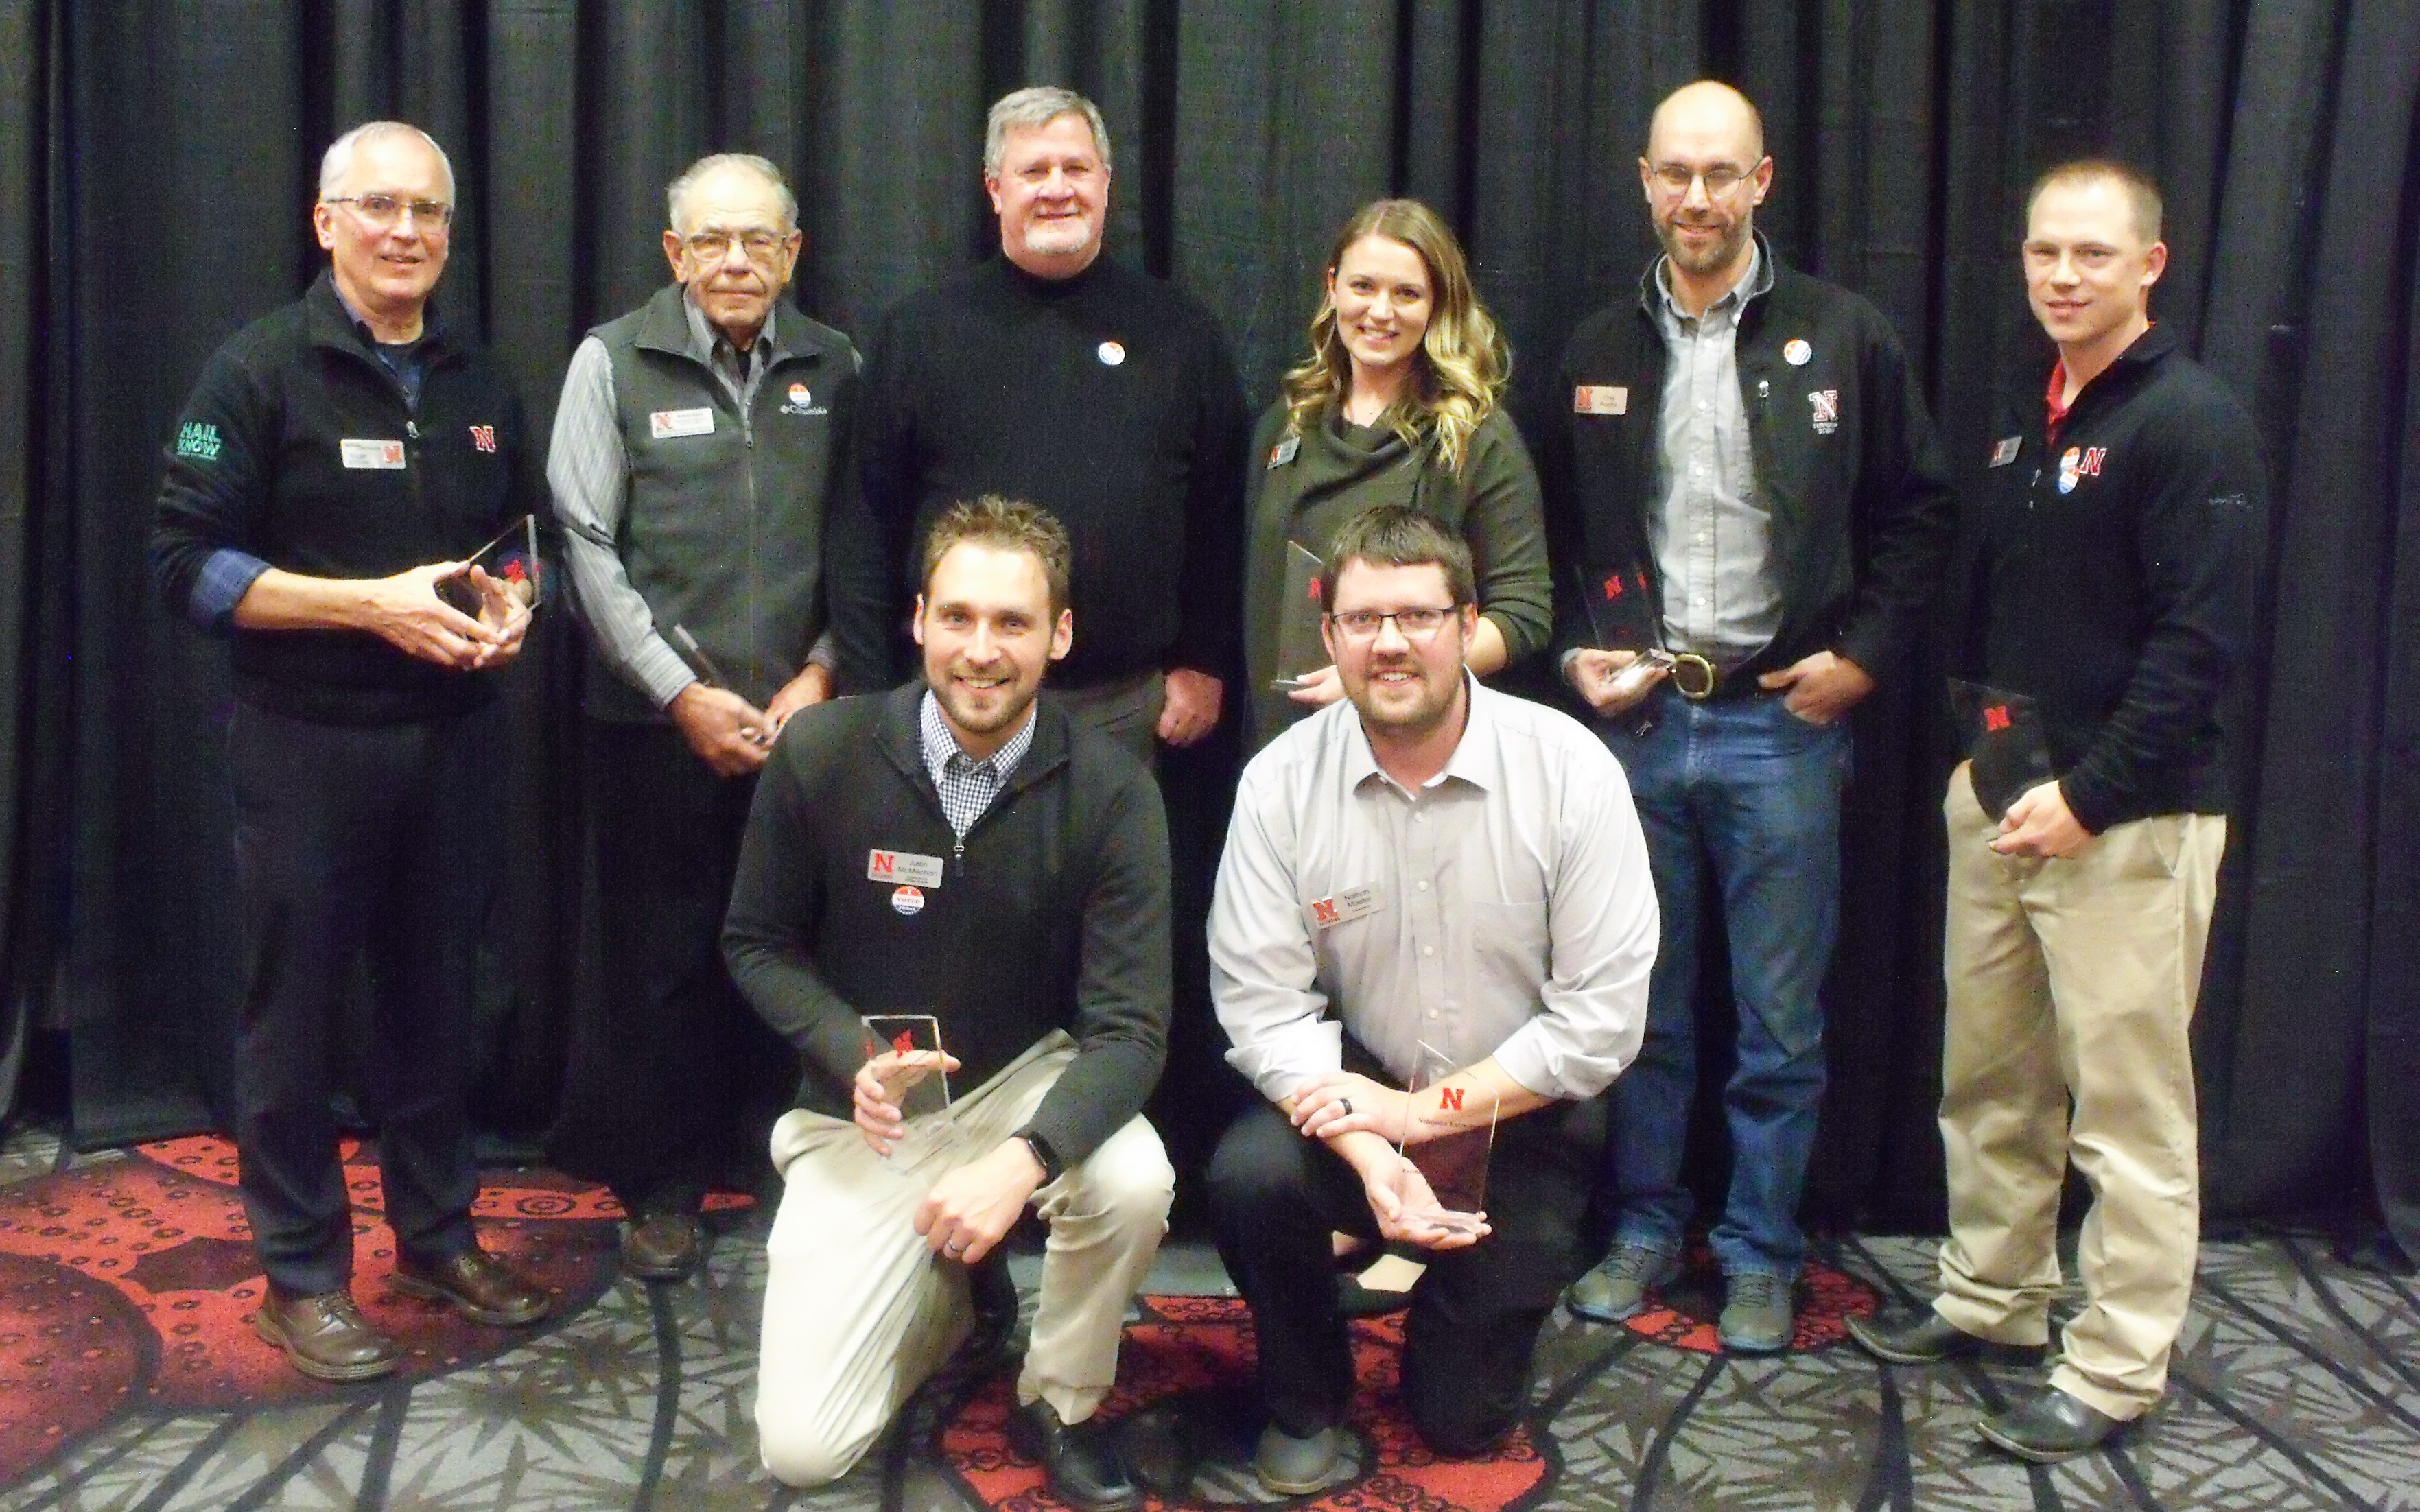 Hail Know team members Justin McMechan (front row, left to right), Nathan Mueller, Roger Elmore (back row, left to right), Robert Klein, Daren Redfern, Ashley Mueller, Chris Proctor and Tyler Williams receive the Excellence in Extension Team award.